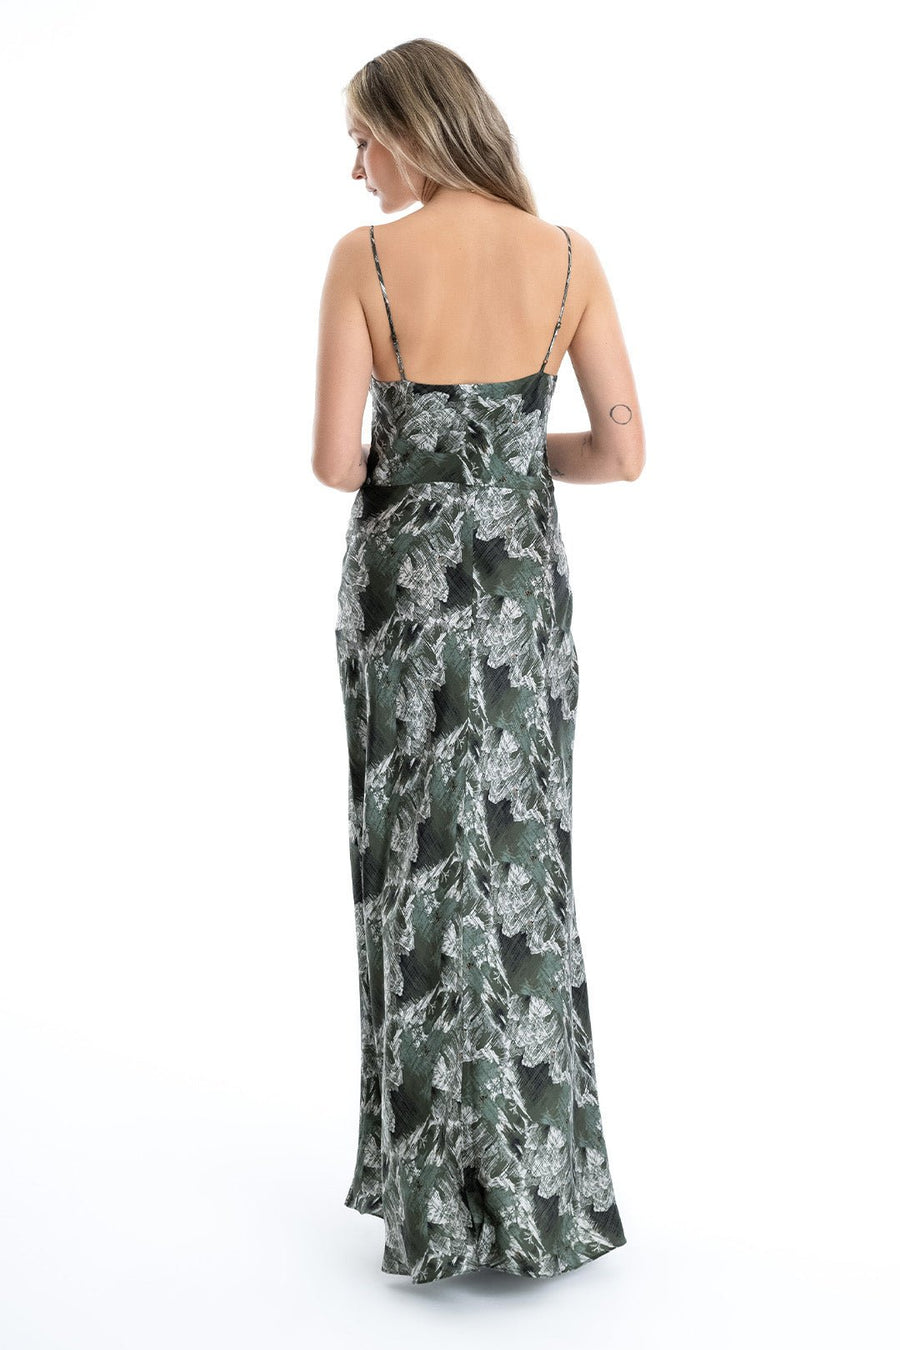 OASIS BIAS MAXI DRESS, MEADOW - Burning Torch Online Boutique